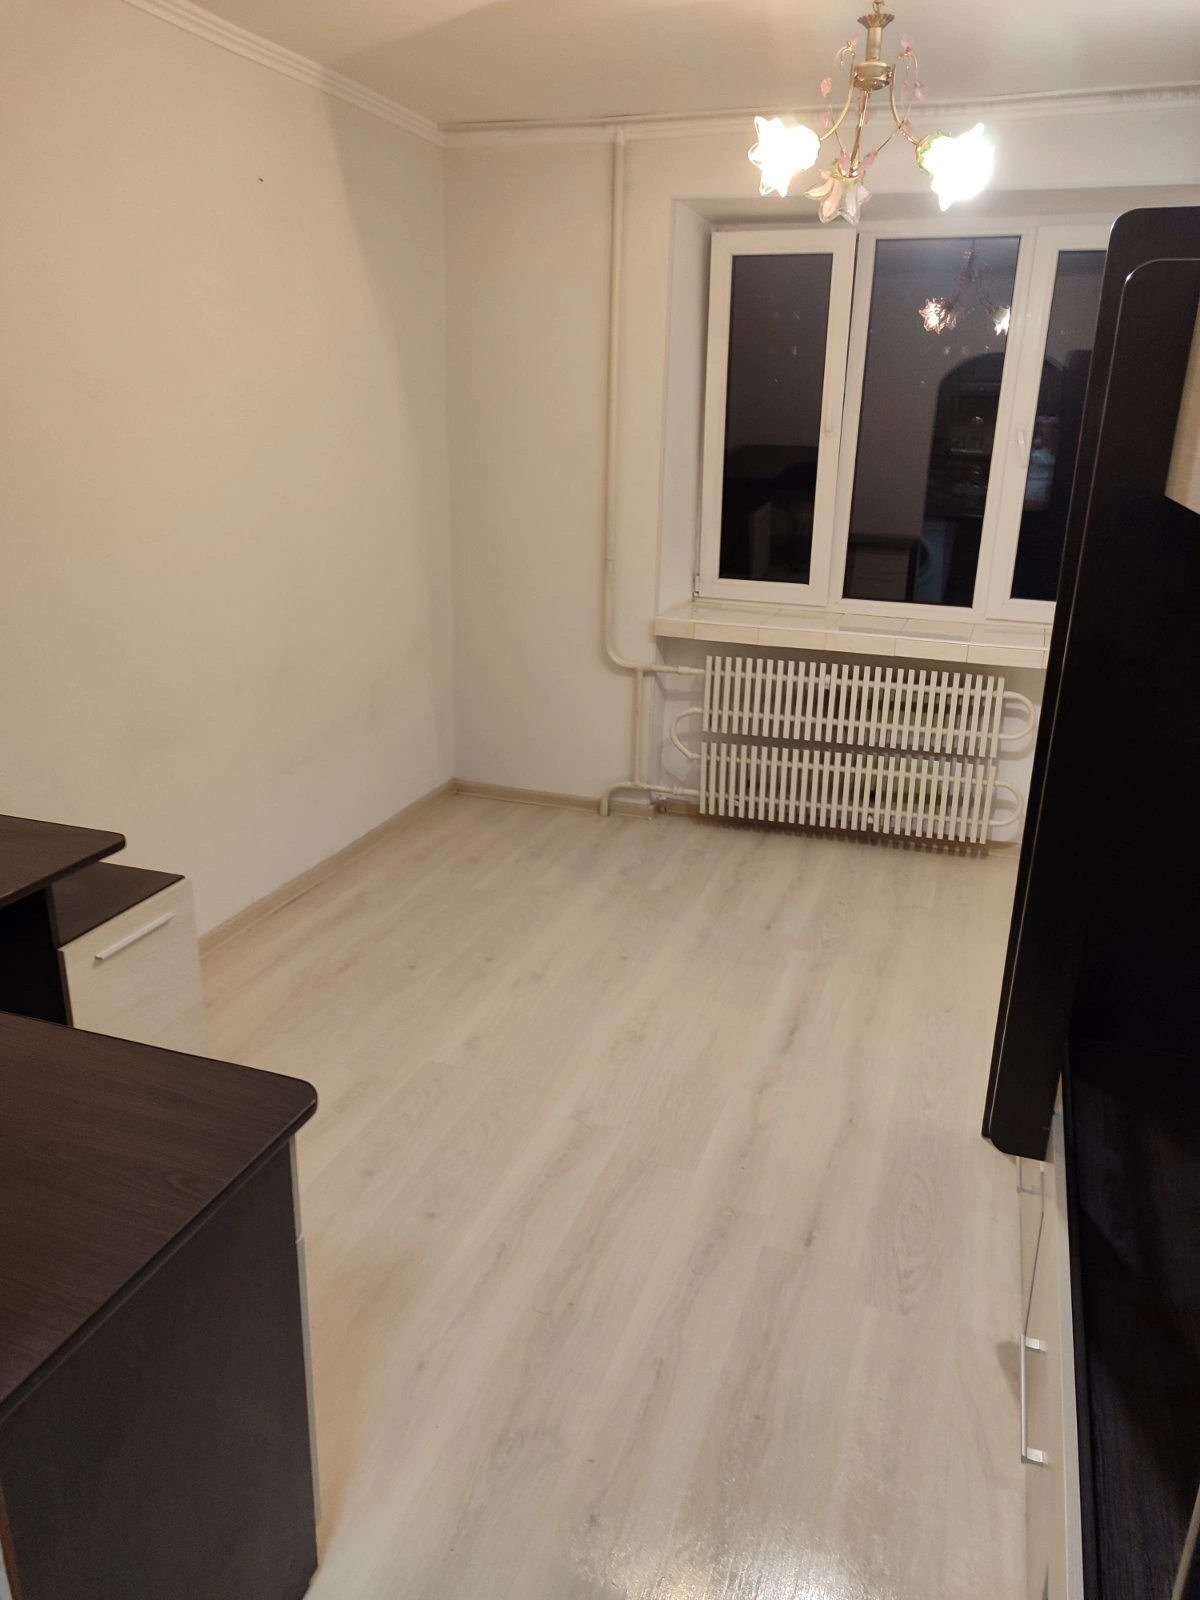 Room for rent for a long time. 1 room, 18 m², 4th floor/5 floors. Bam, Ternopil. 